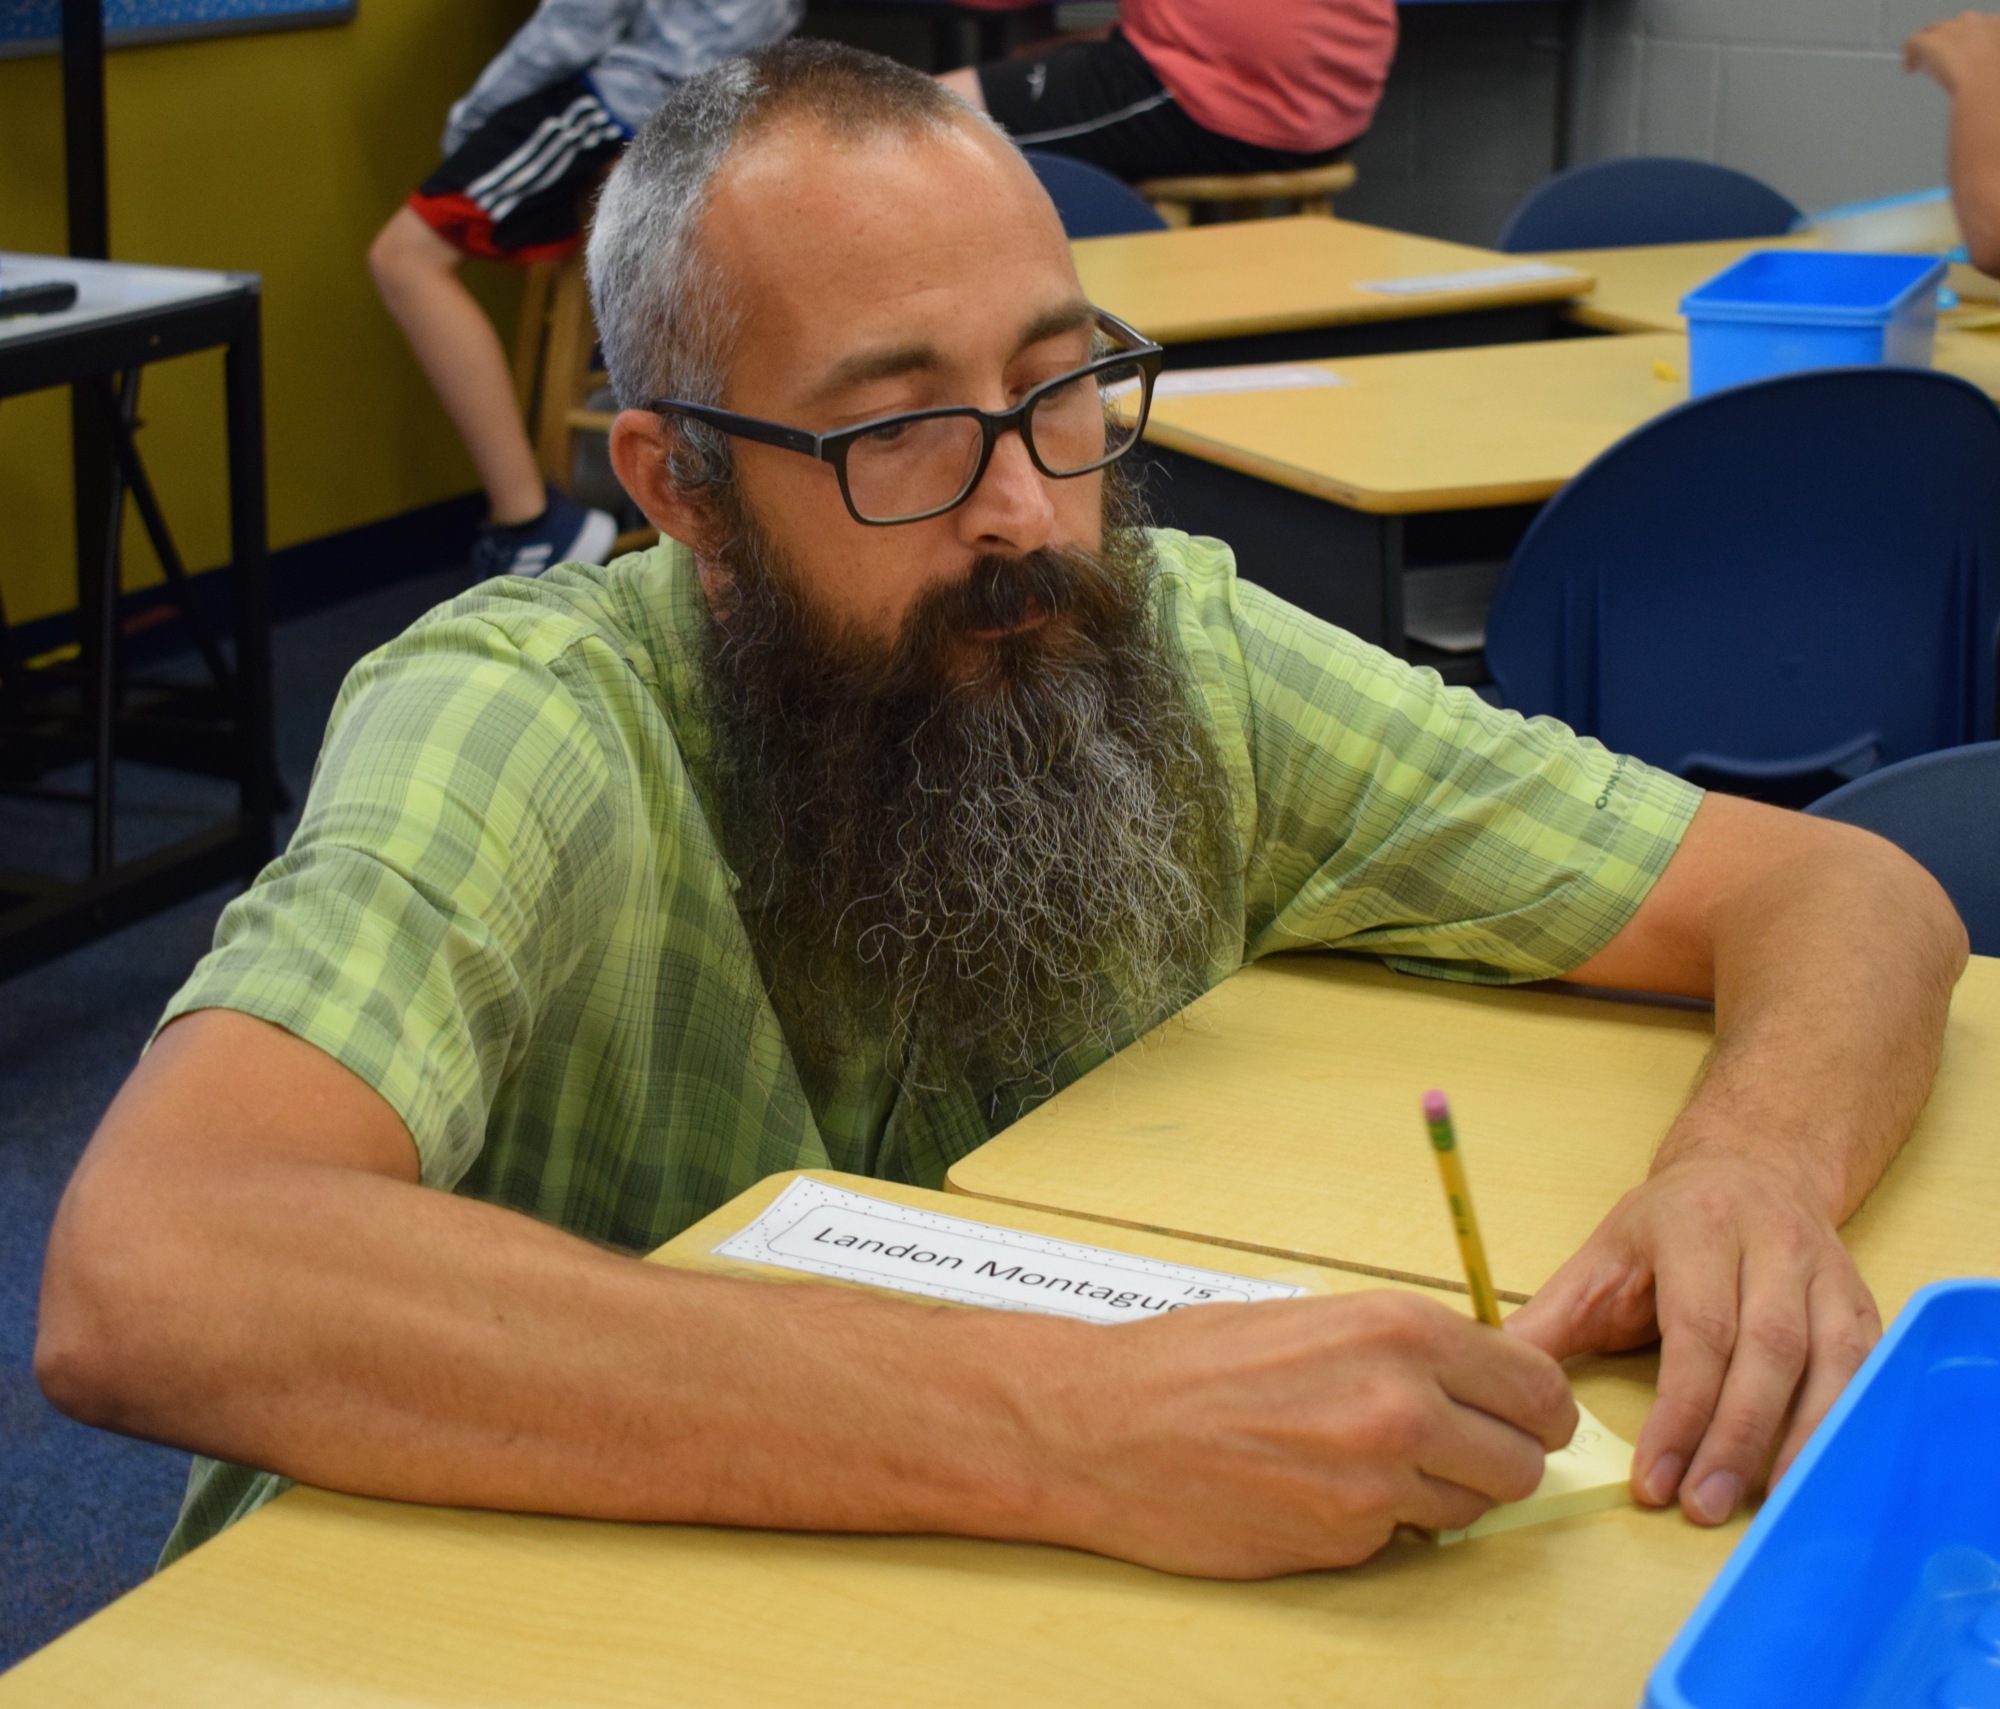 Justin Pelletier, a former University of South Florida-Sarasota Manatee student, worked with teachers and students at Freedom Elementary as part of his education at USFSM.